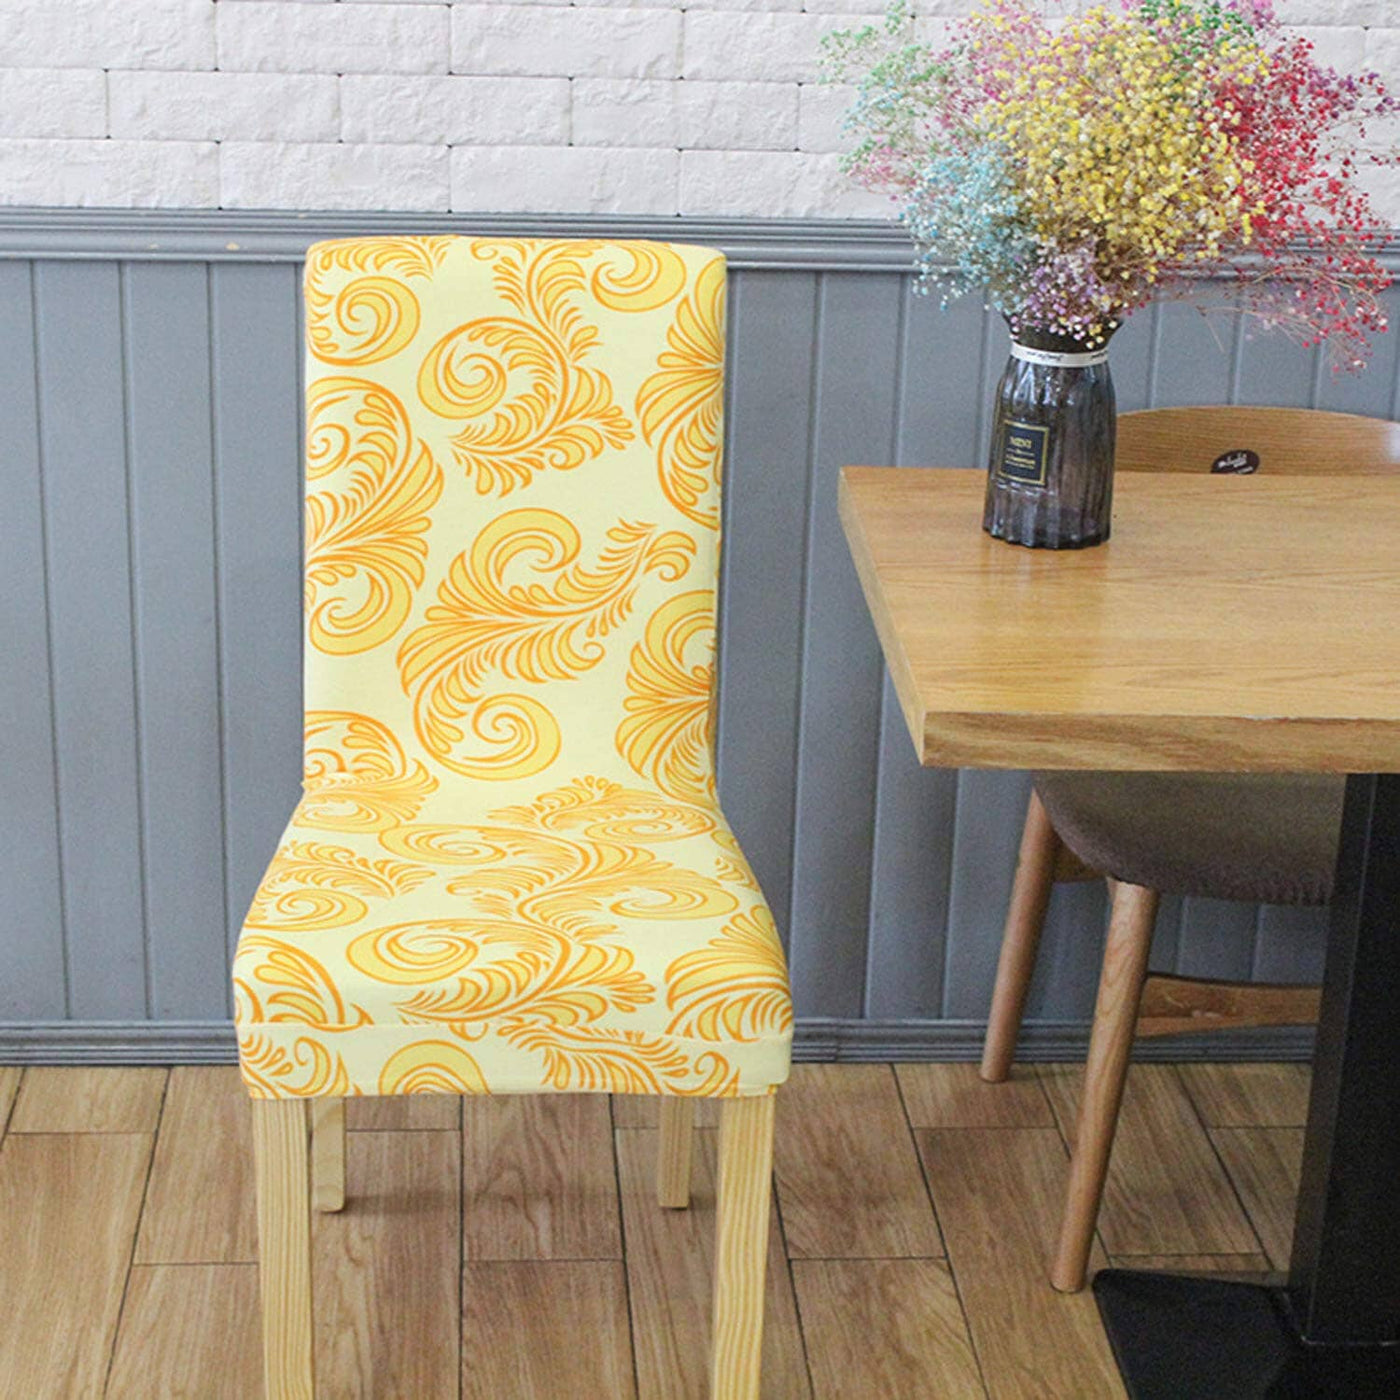 Thai Yellow Premium Chair Cover - Stretchable & Elastic Fitted Great Happy IN 2 PCS - ₹799 